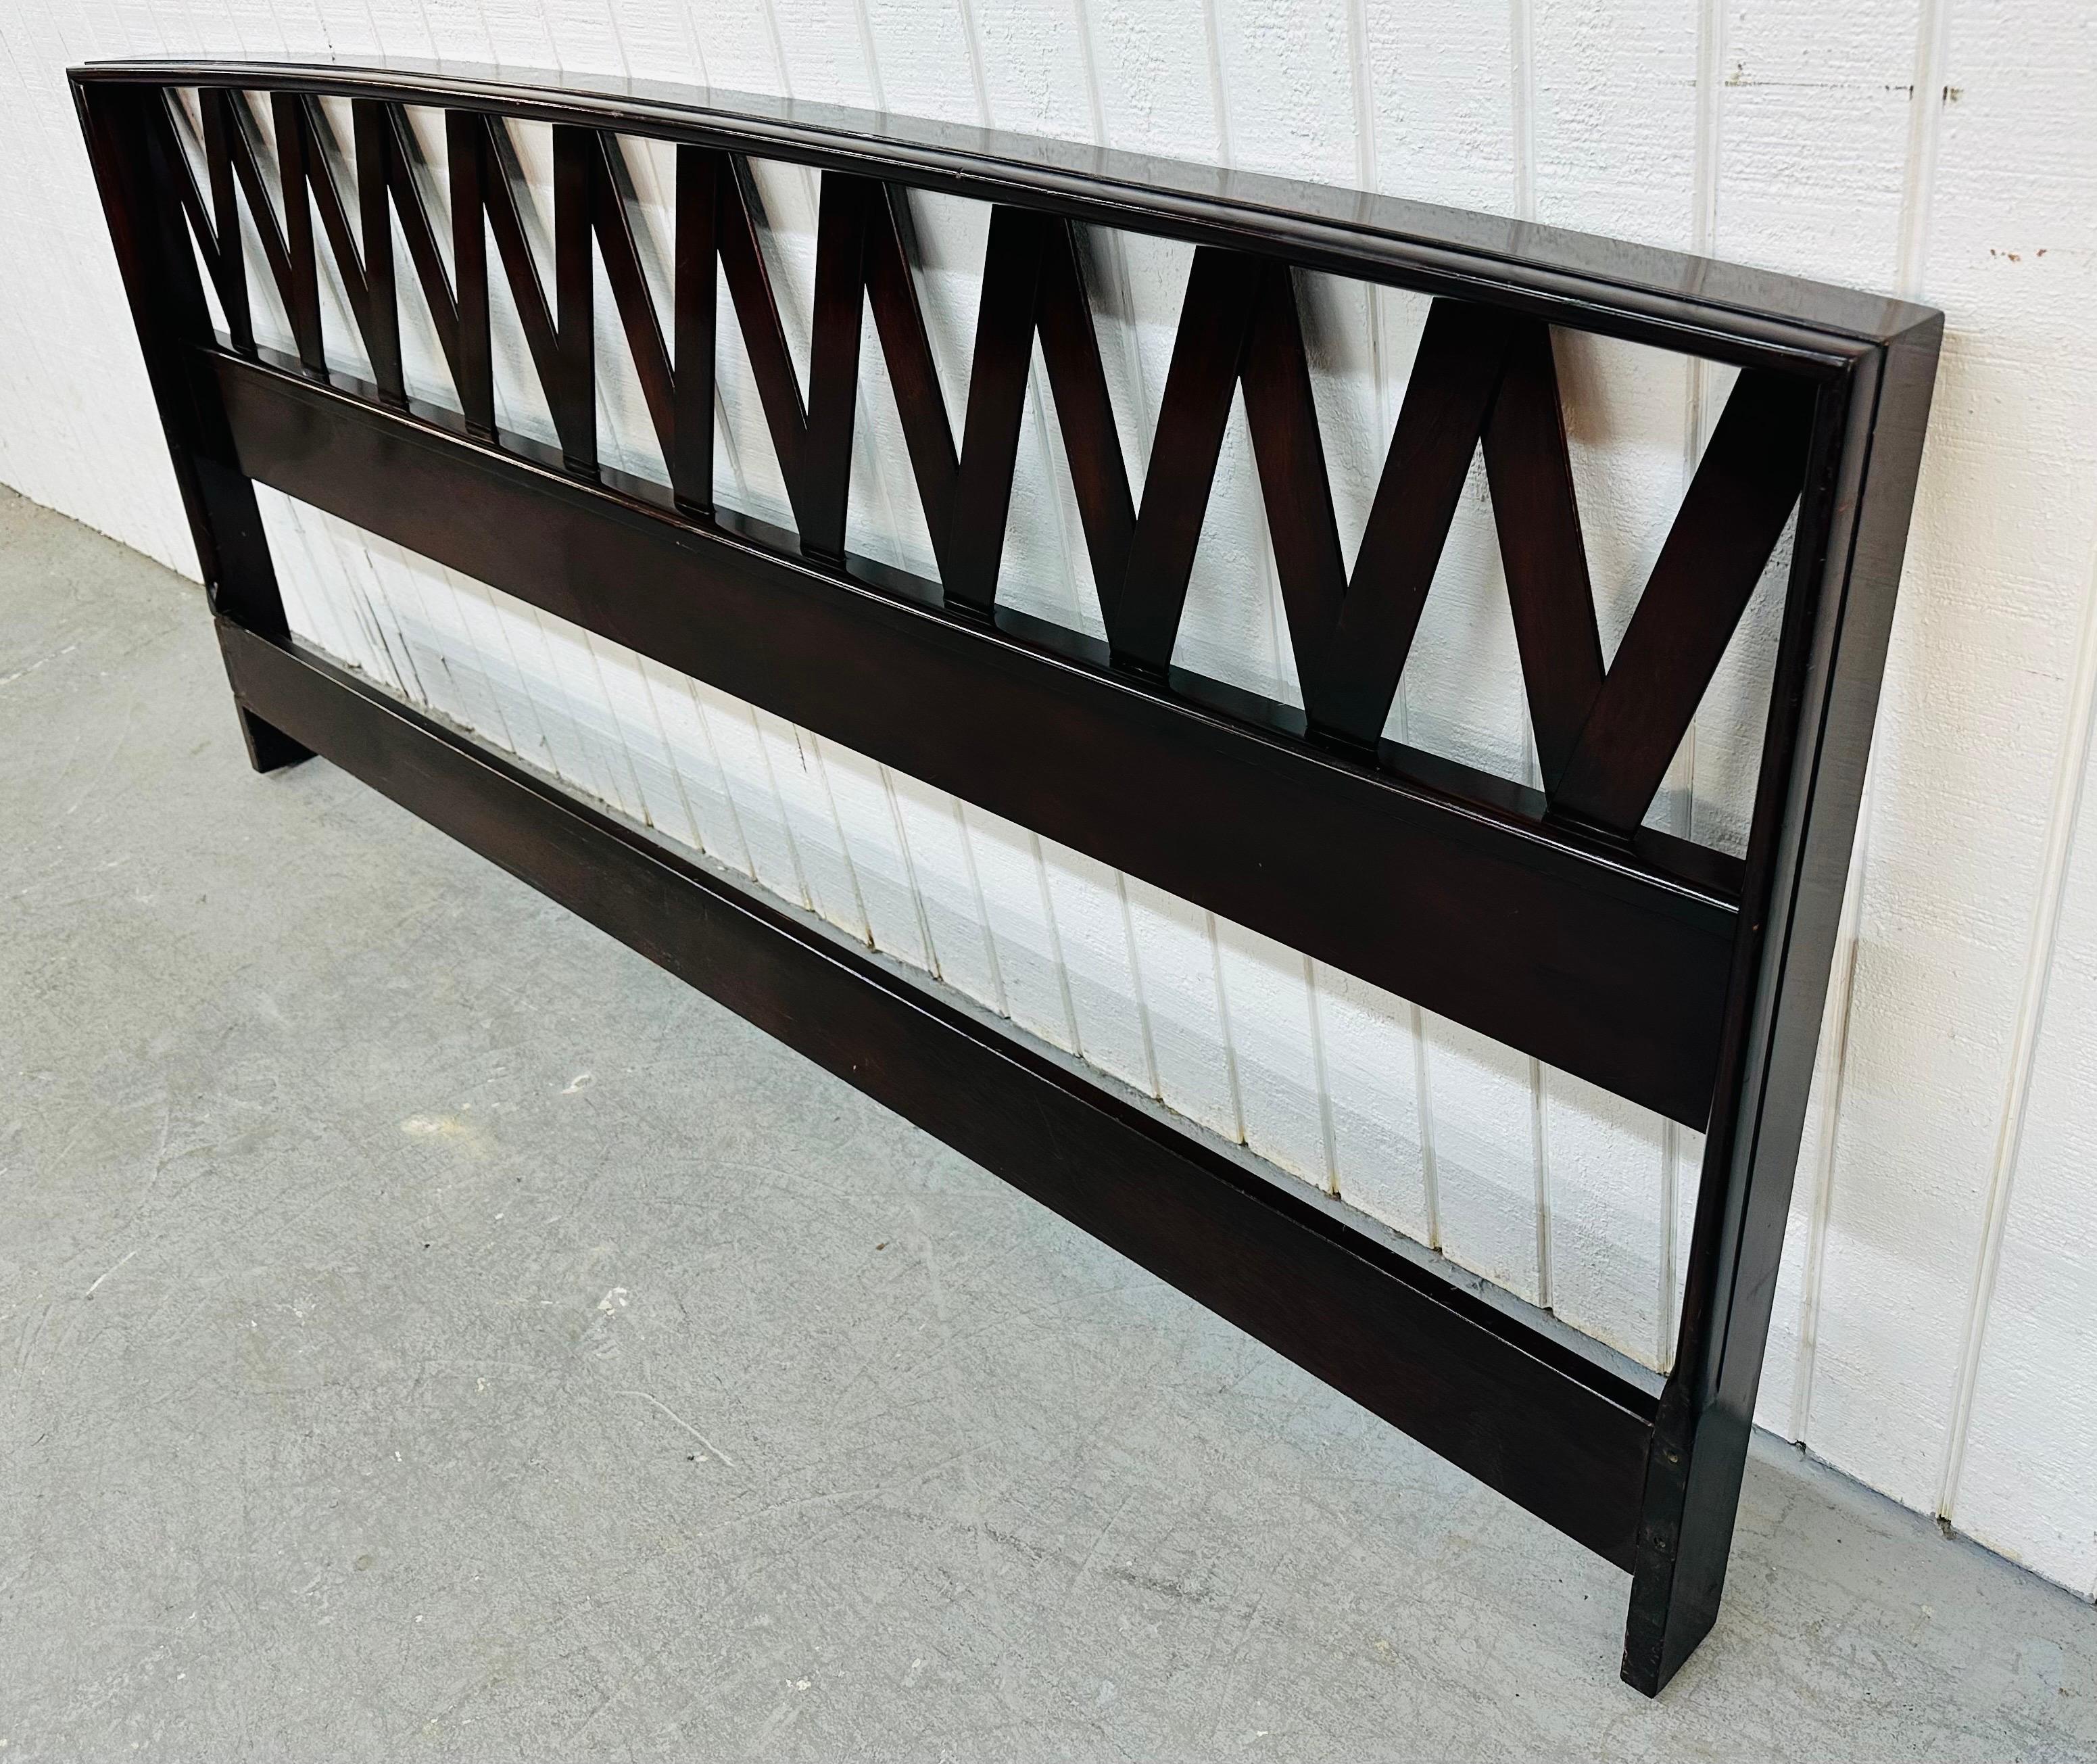 This listing is for a Mid-Century Modern Paul Frankl Mahogany King Headboard. Featuring a straight line design, zigzag head rest, and a beautiful mahogany finish. This is an exceptional combination of quality and design by Paul Frankl!